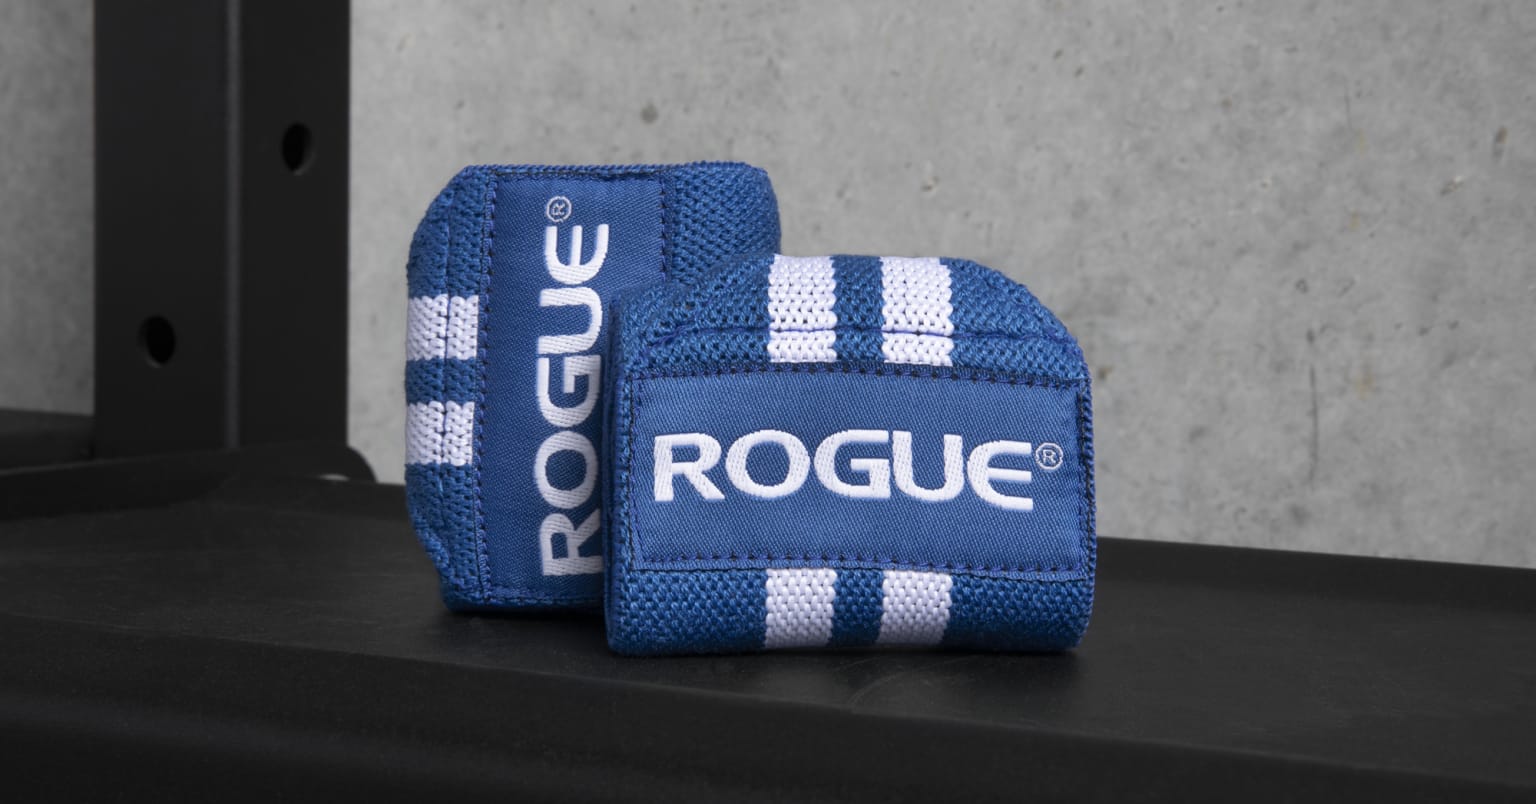 Rogue Wrist - Blue and White Fitness Europe